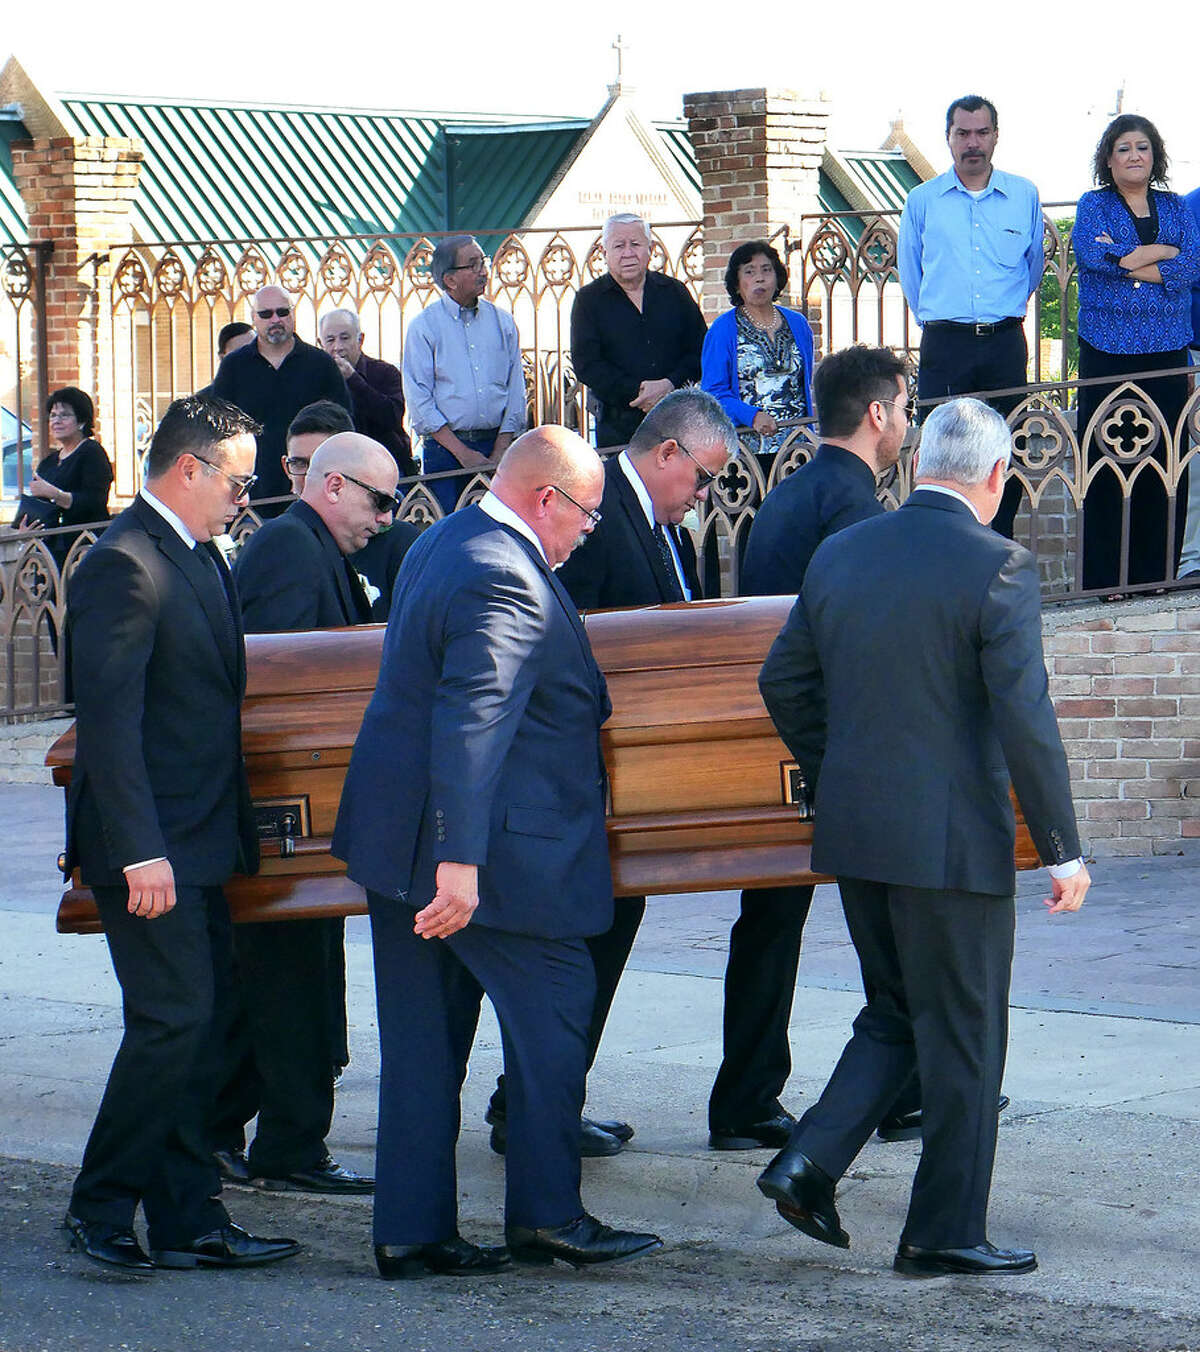 Pallbearers carry the body of former LMT Editor Odilon "Odie" Arambula for funeral services at Holy Redeemer Church, Monday, October 23, 2017.